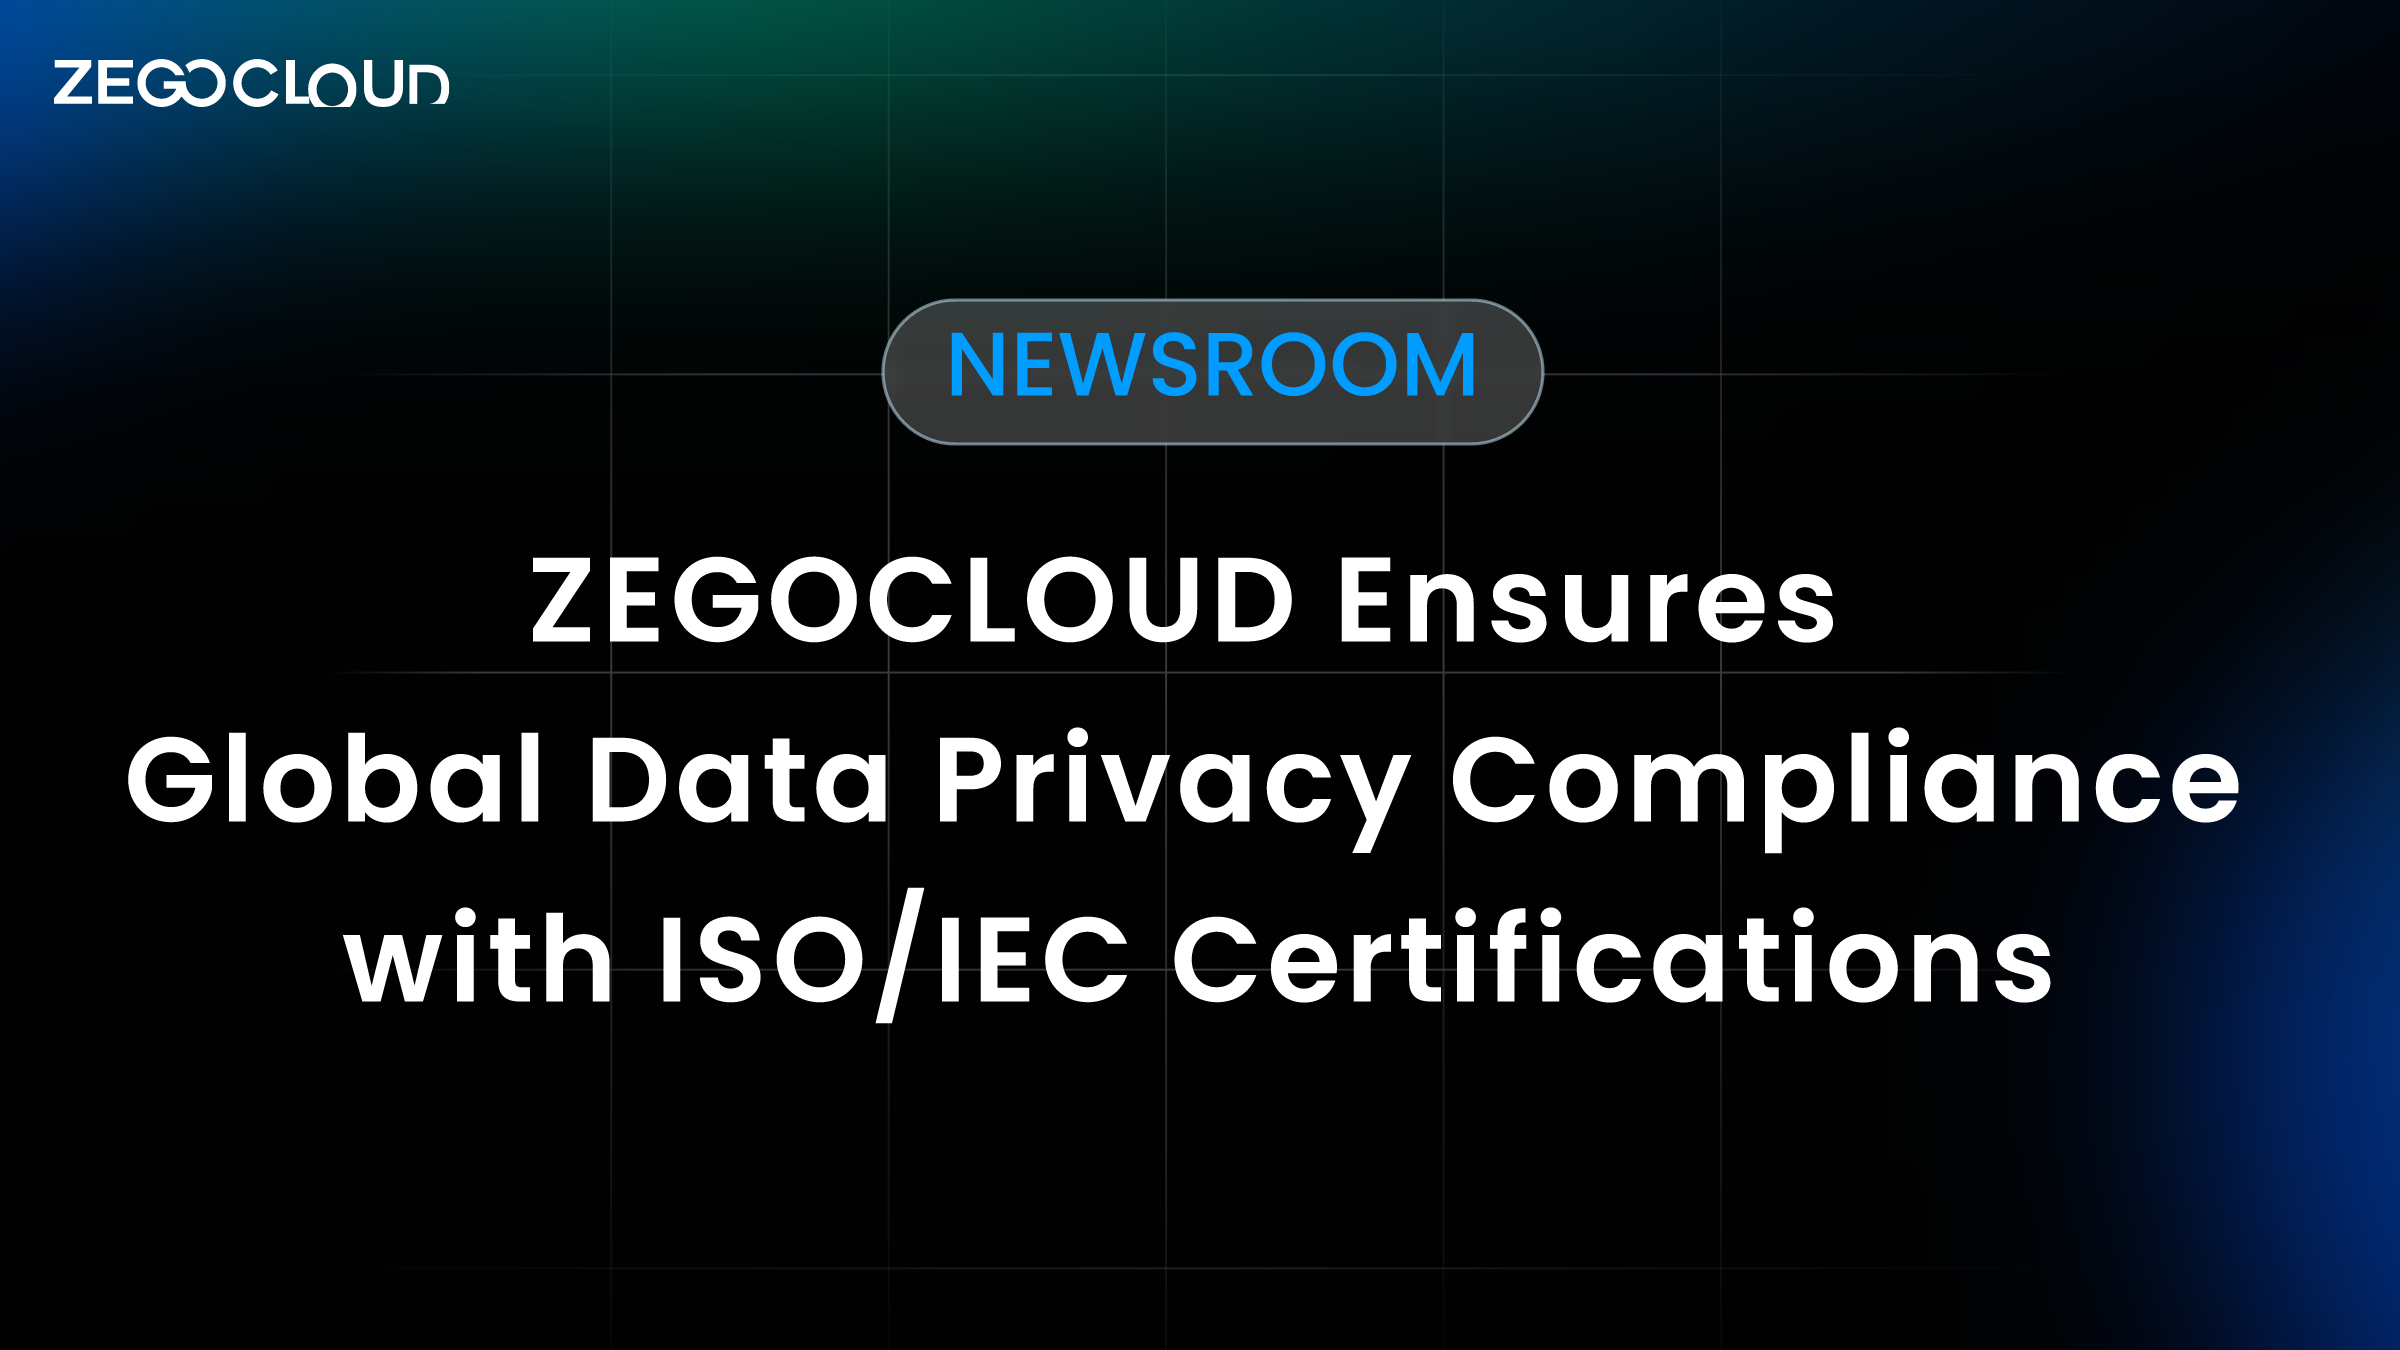 ZEGOCLOUD ISO/IEC Accreditation for Privacy Compliance